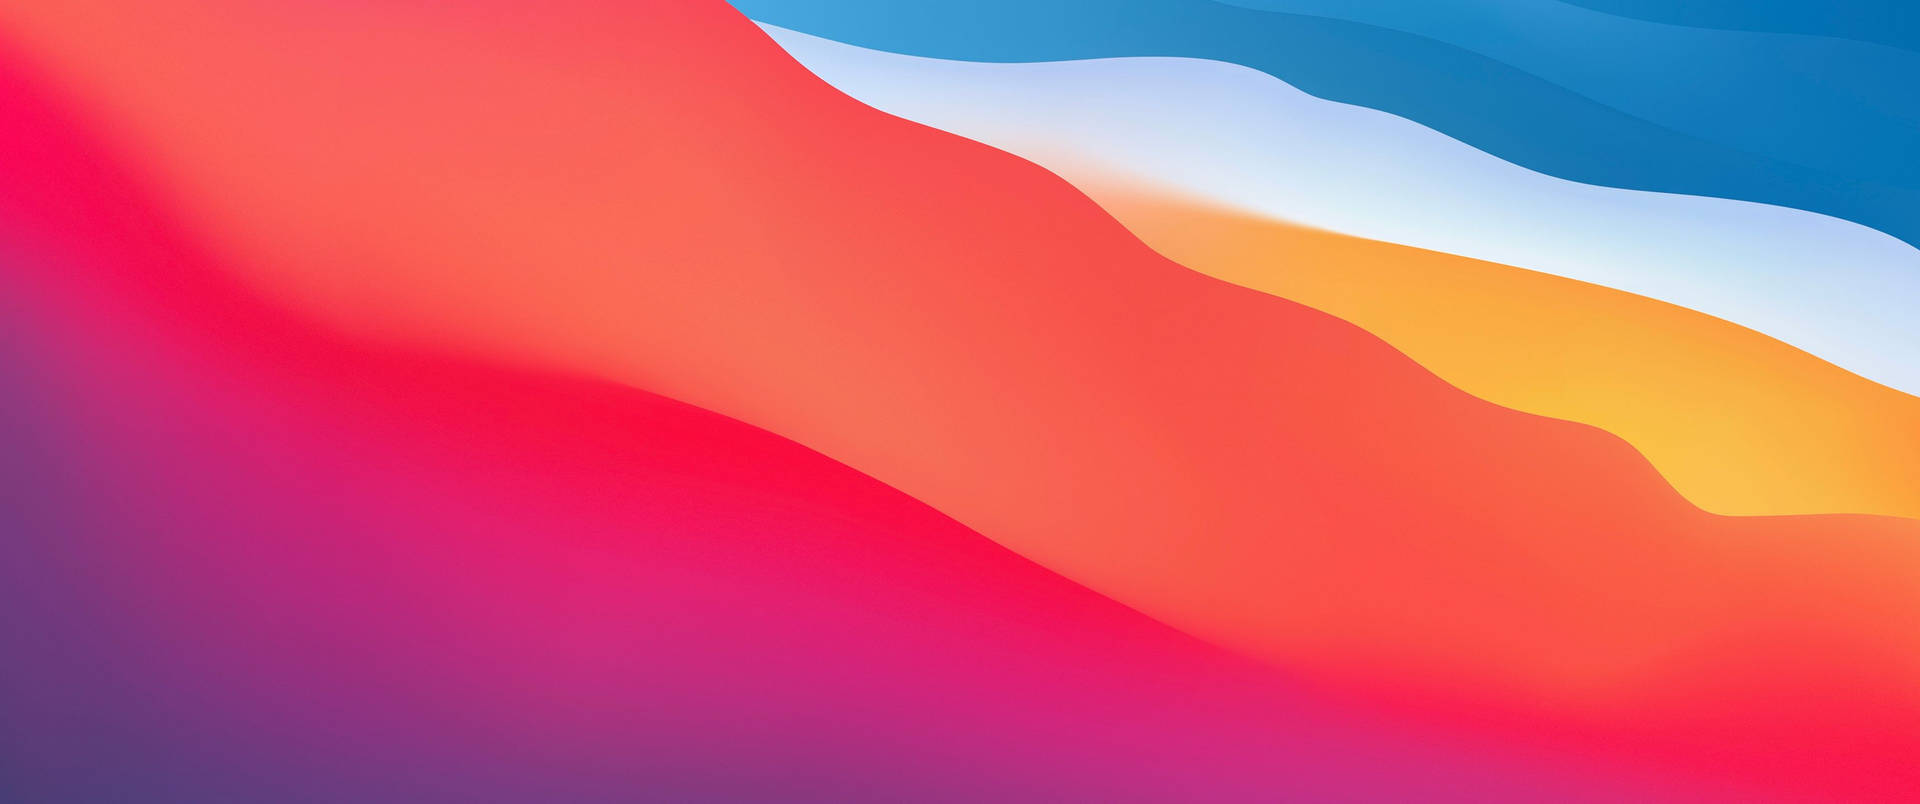 3440x1440 Minimalist Abstract Color Waves Background